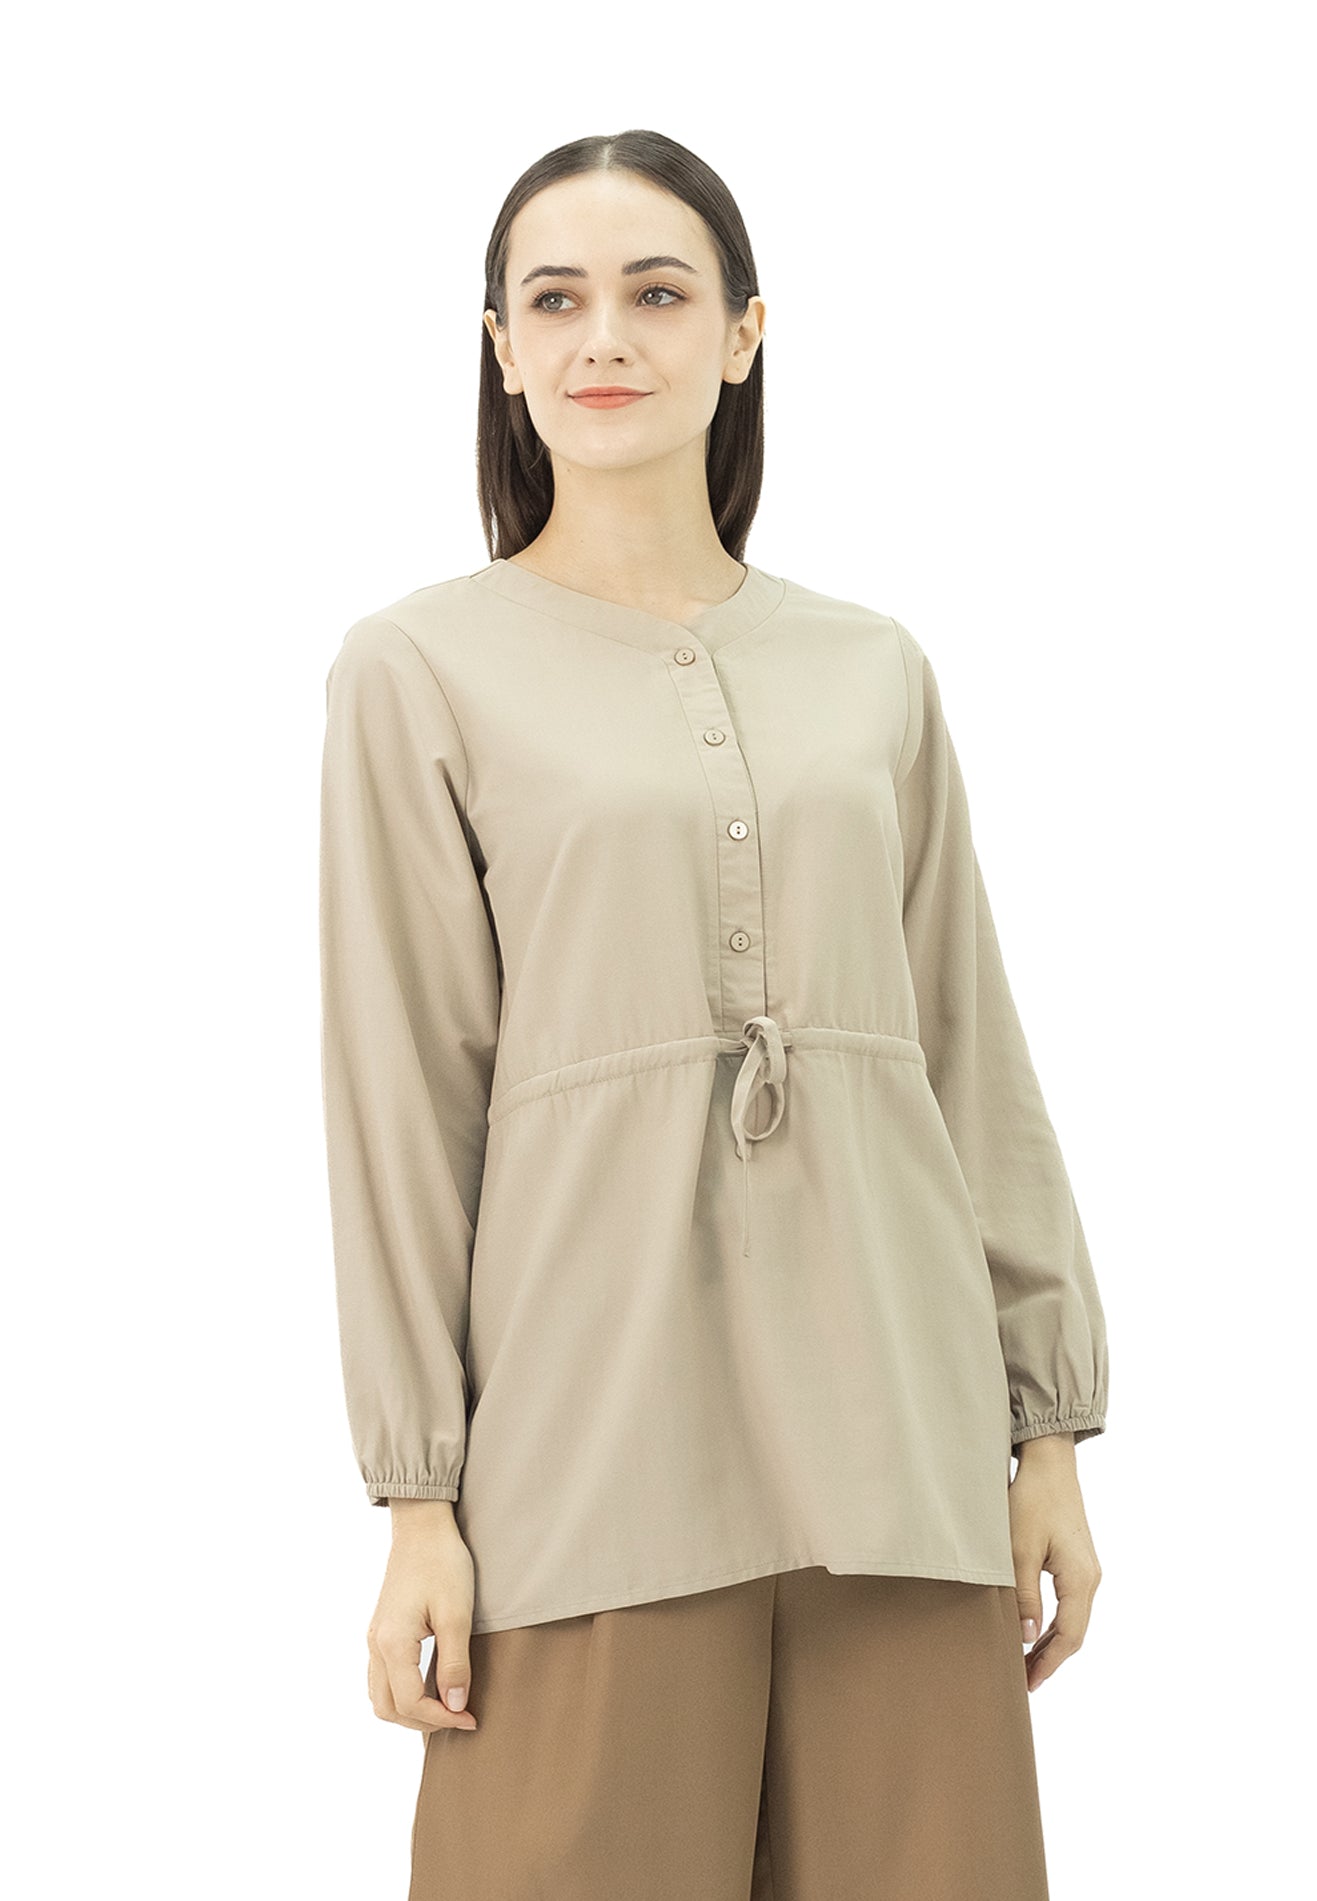 DAISY By VOIR Drawstring Tie Waisted Front Blouse